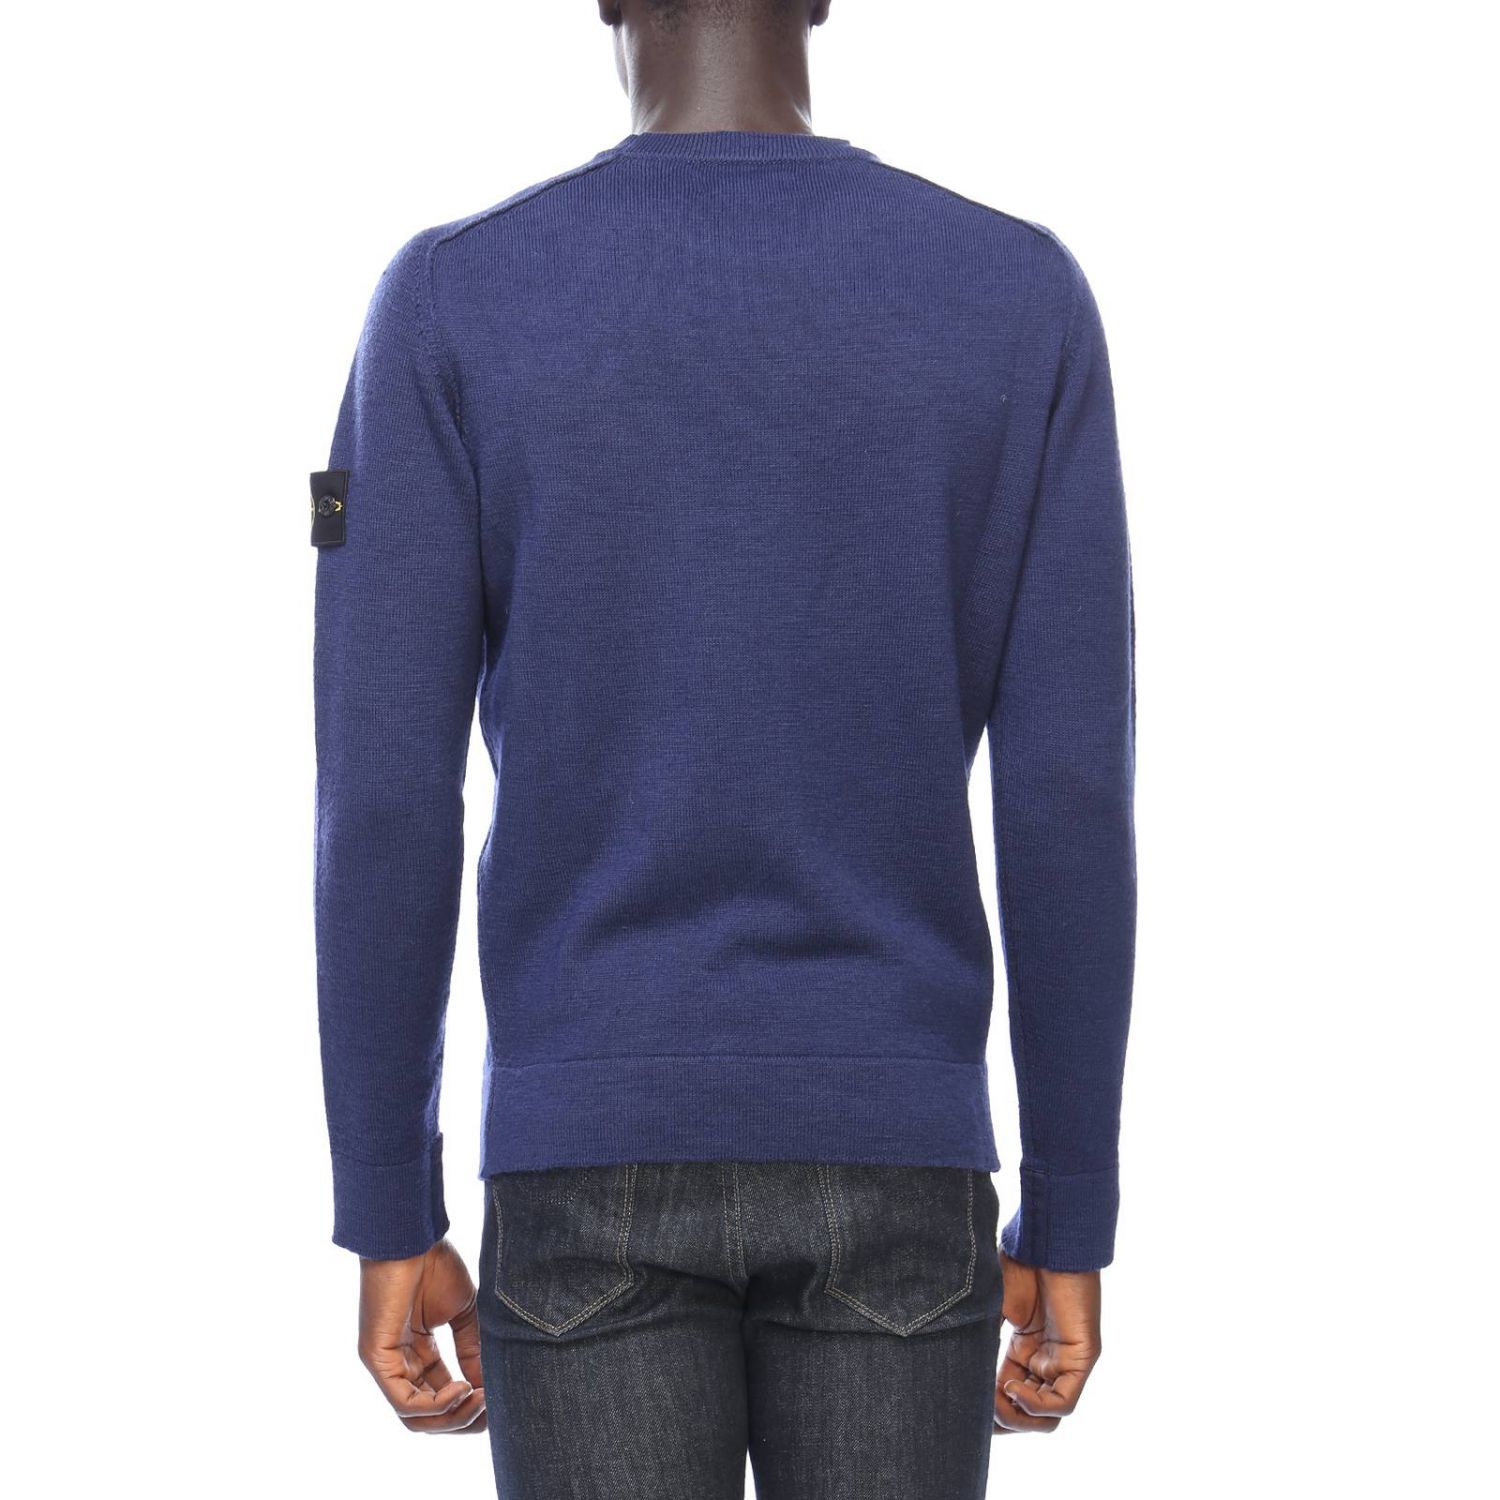 Stone Island Outlet: Sweater men - Blue | Sweater Stone Island 531D7 ...